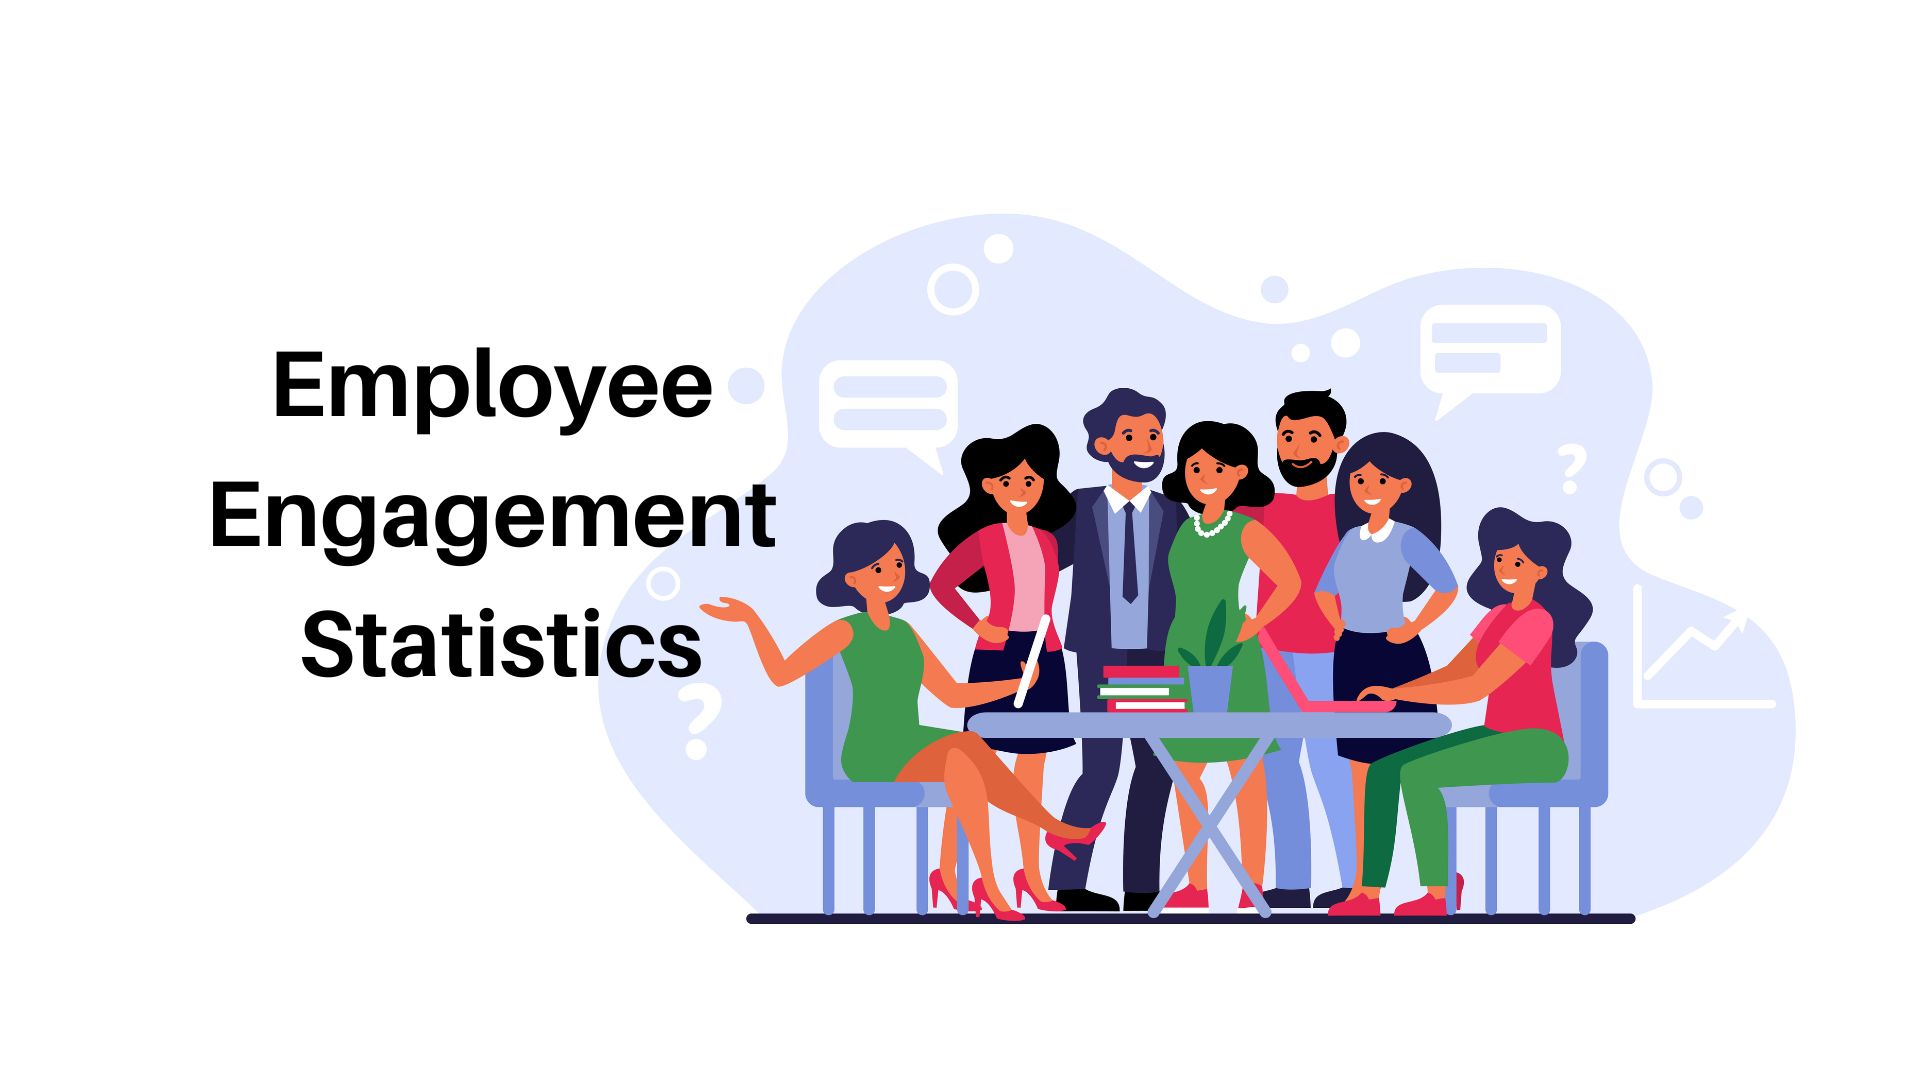 Employee Engagement Statistics By Team Performance, Region, Countries, Career Development, Workplace, Productivity, Expectation, Working Attitudes, Employee Care and Support